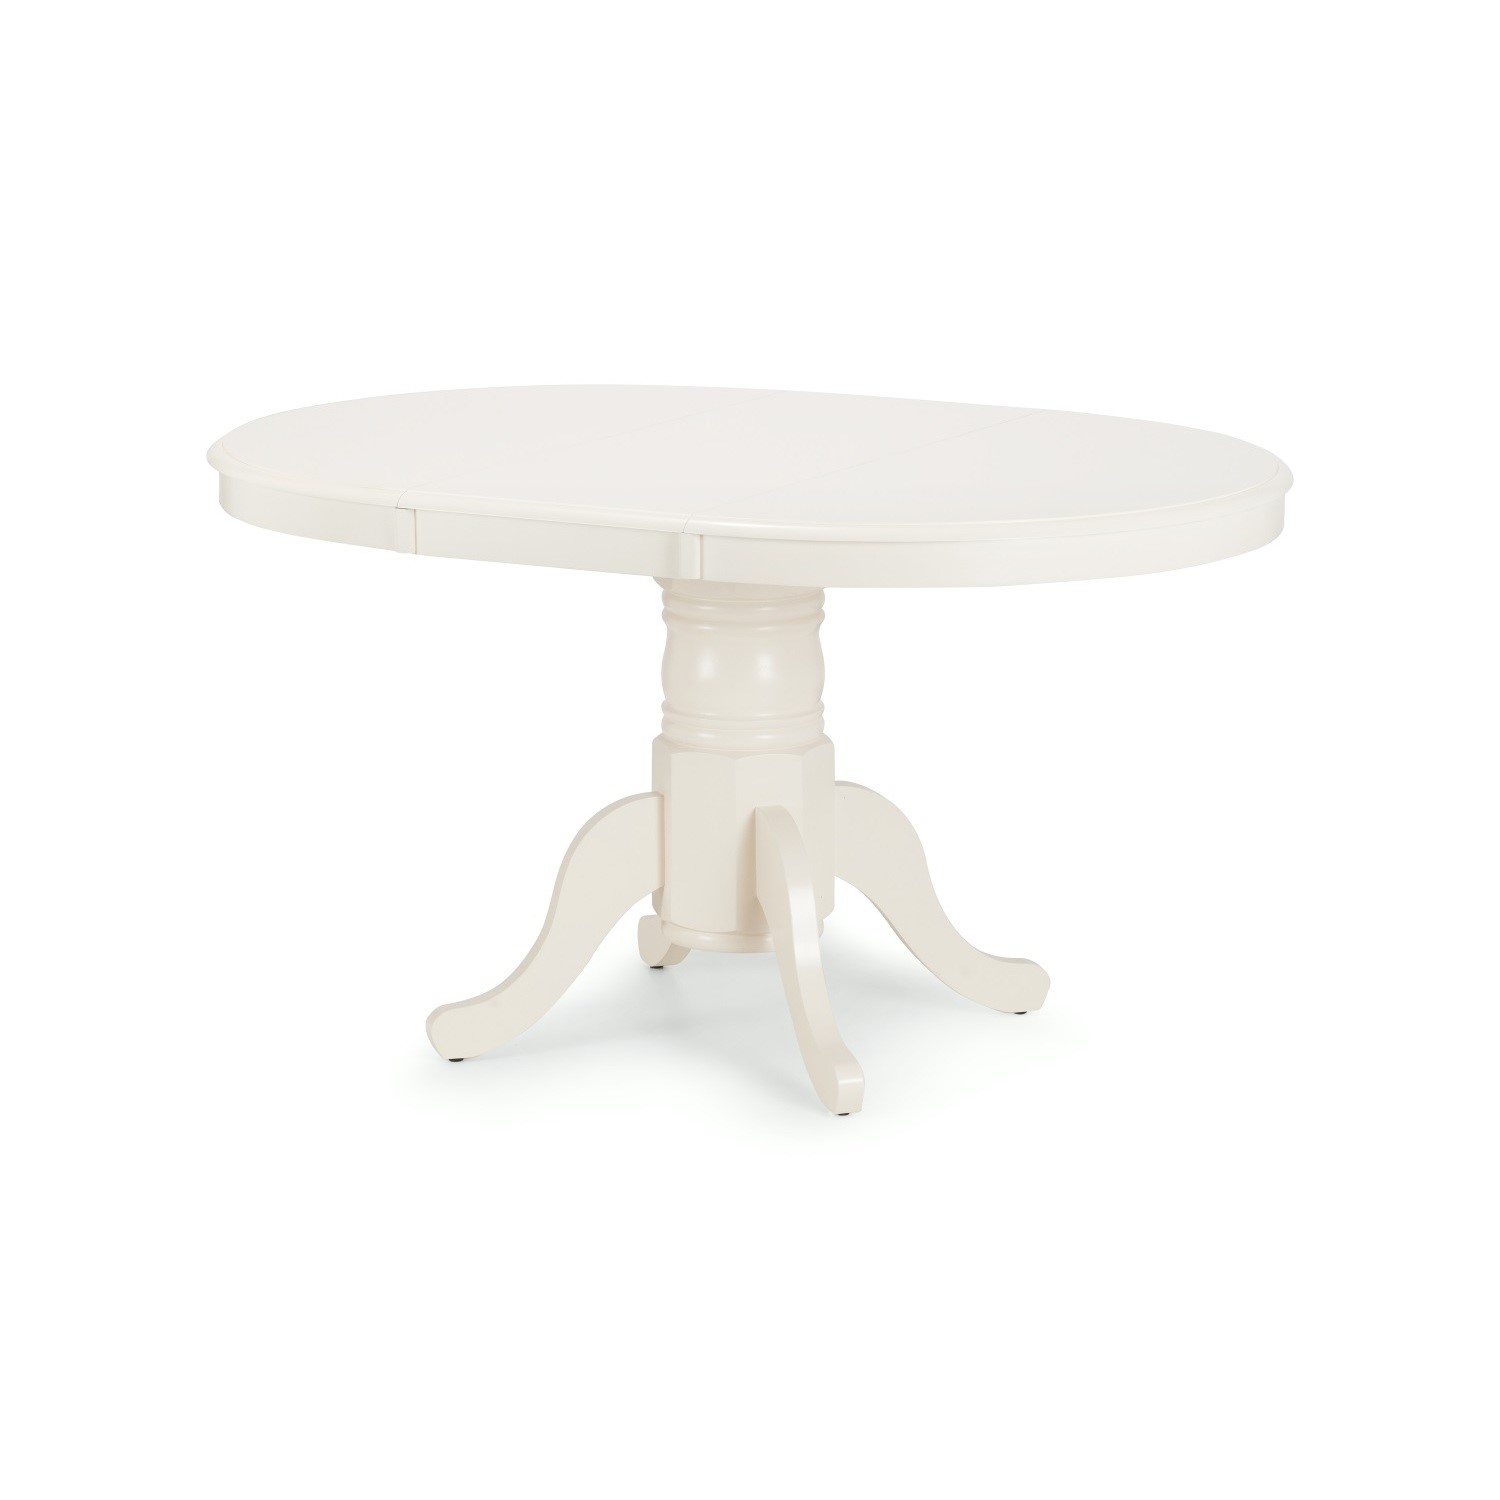 Photo of Ivory round extendable dining table - seats 4-6 - julian bowen